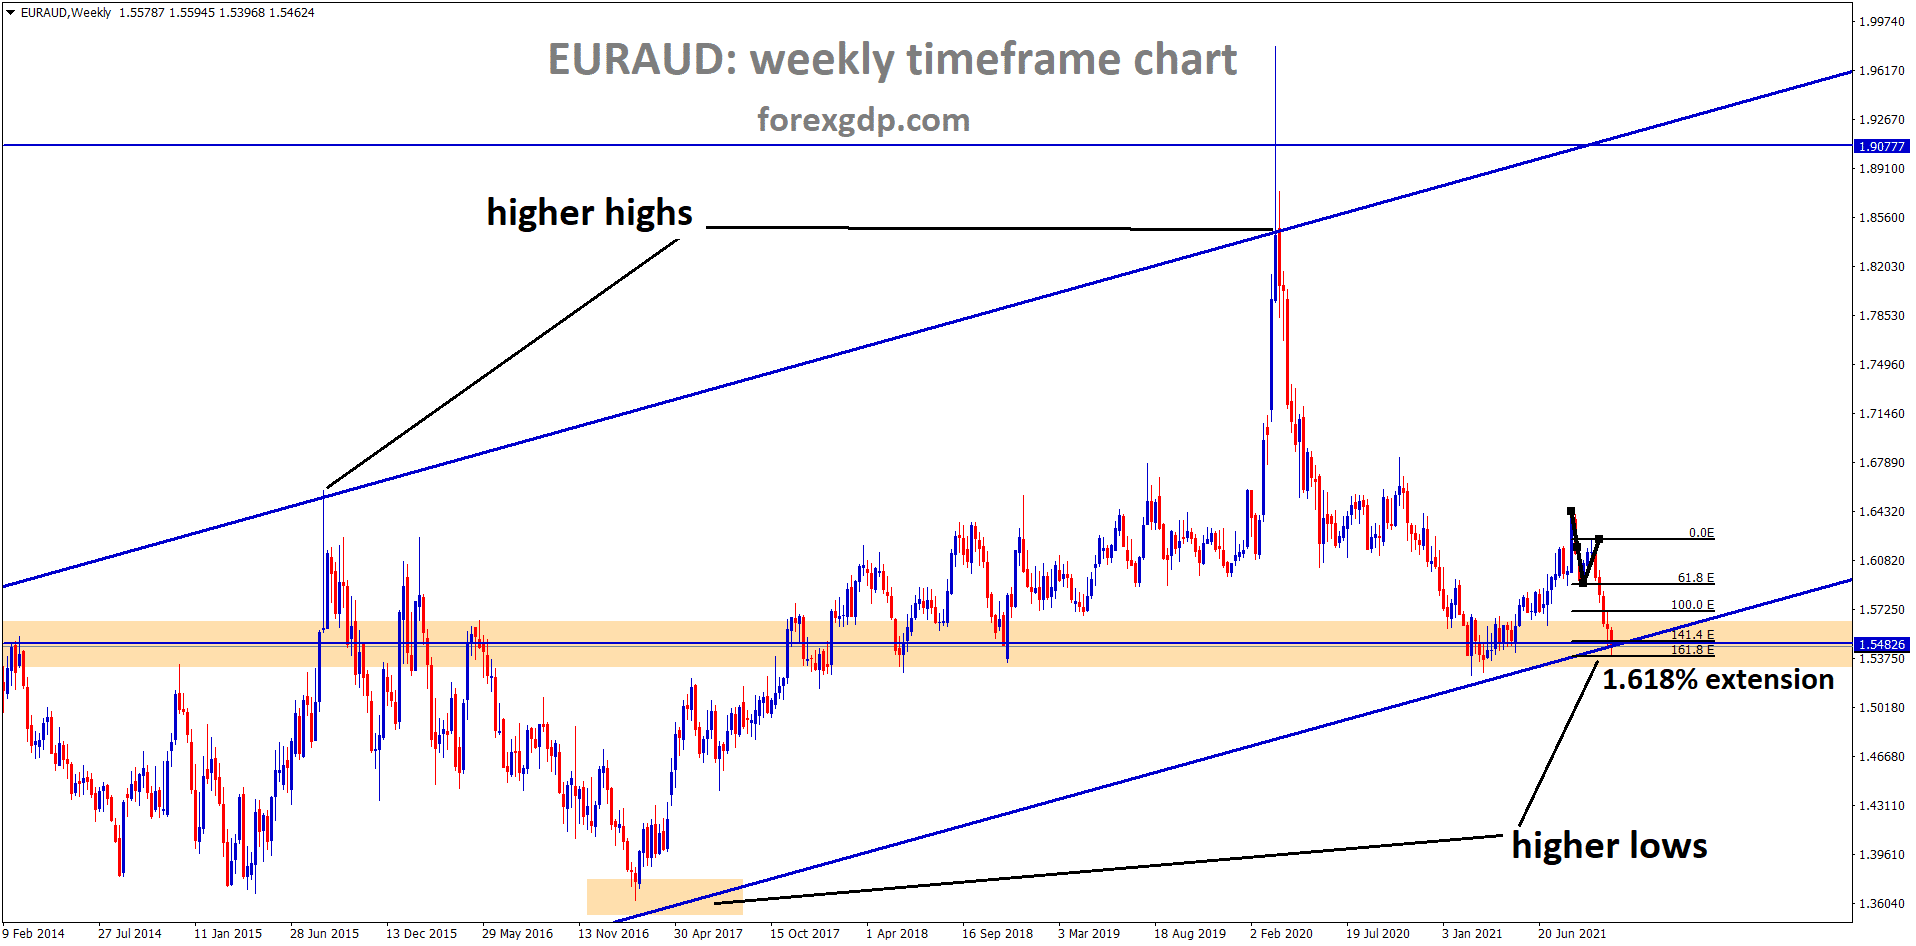 EURAUD is moving in an Ascending channel